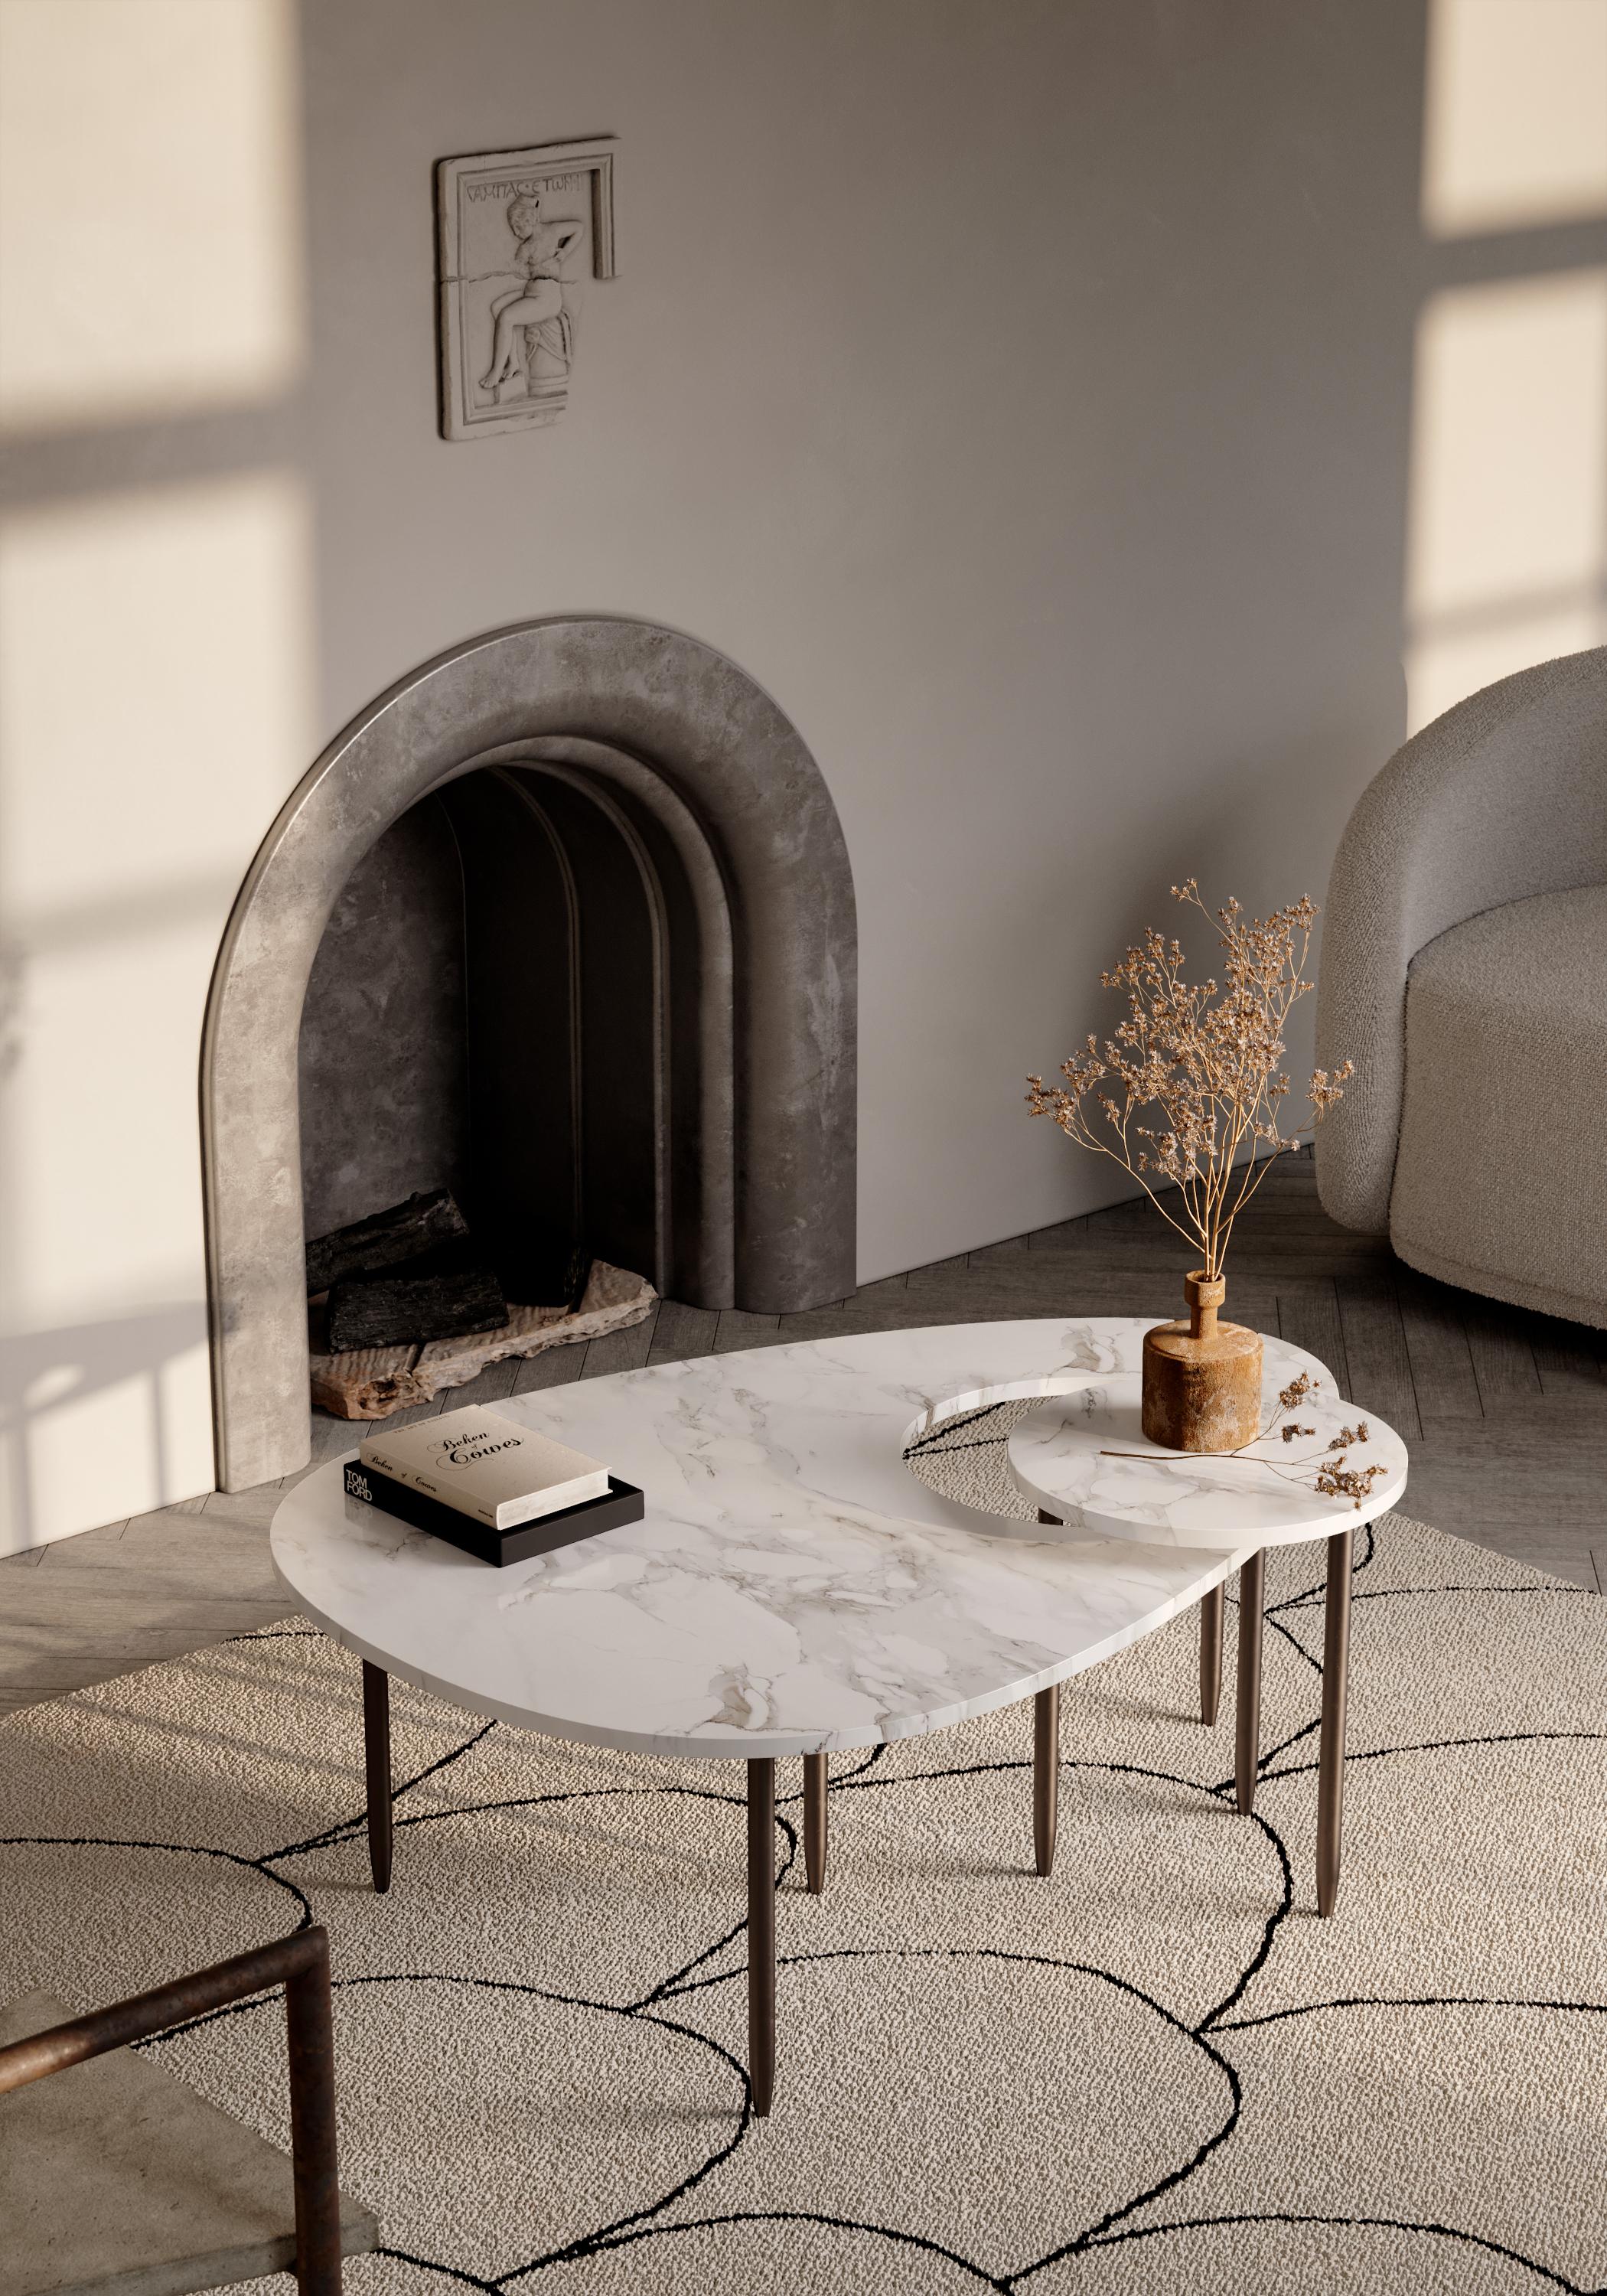 If you are looking for a contemporary marble center table, our product makes the best choice. Our midcentury furniture is inspired by our midnight muse, a luminous tabletop with an interconnecting smaller table floating on linear legs. When placed